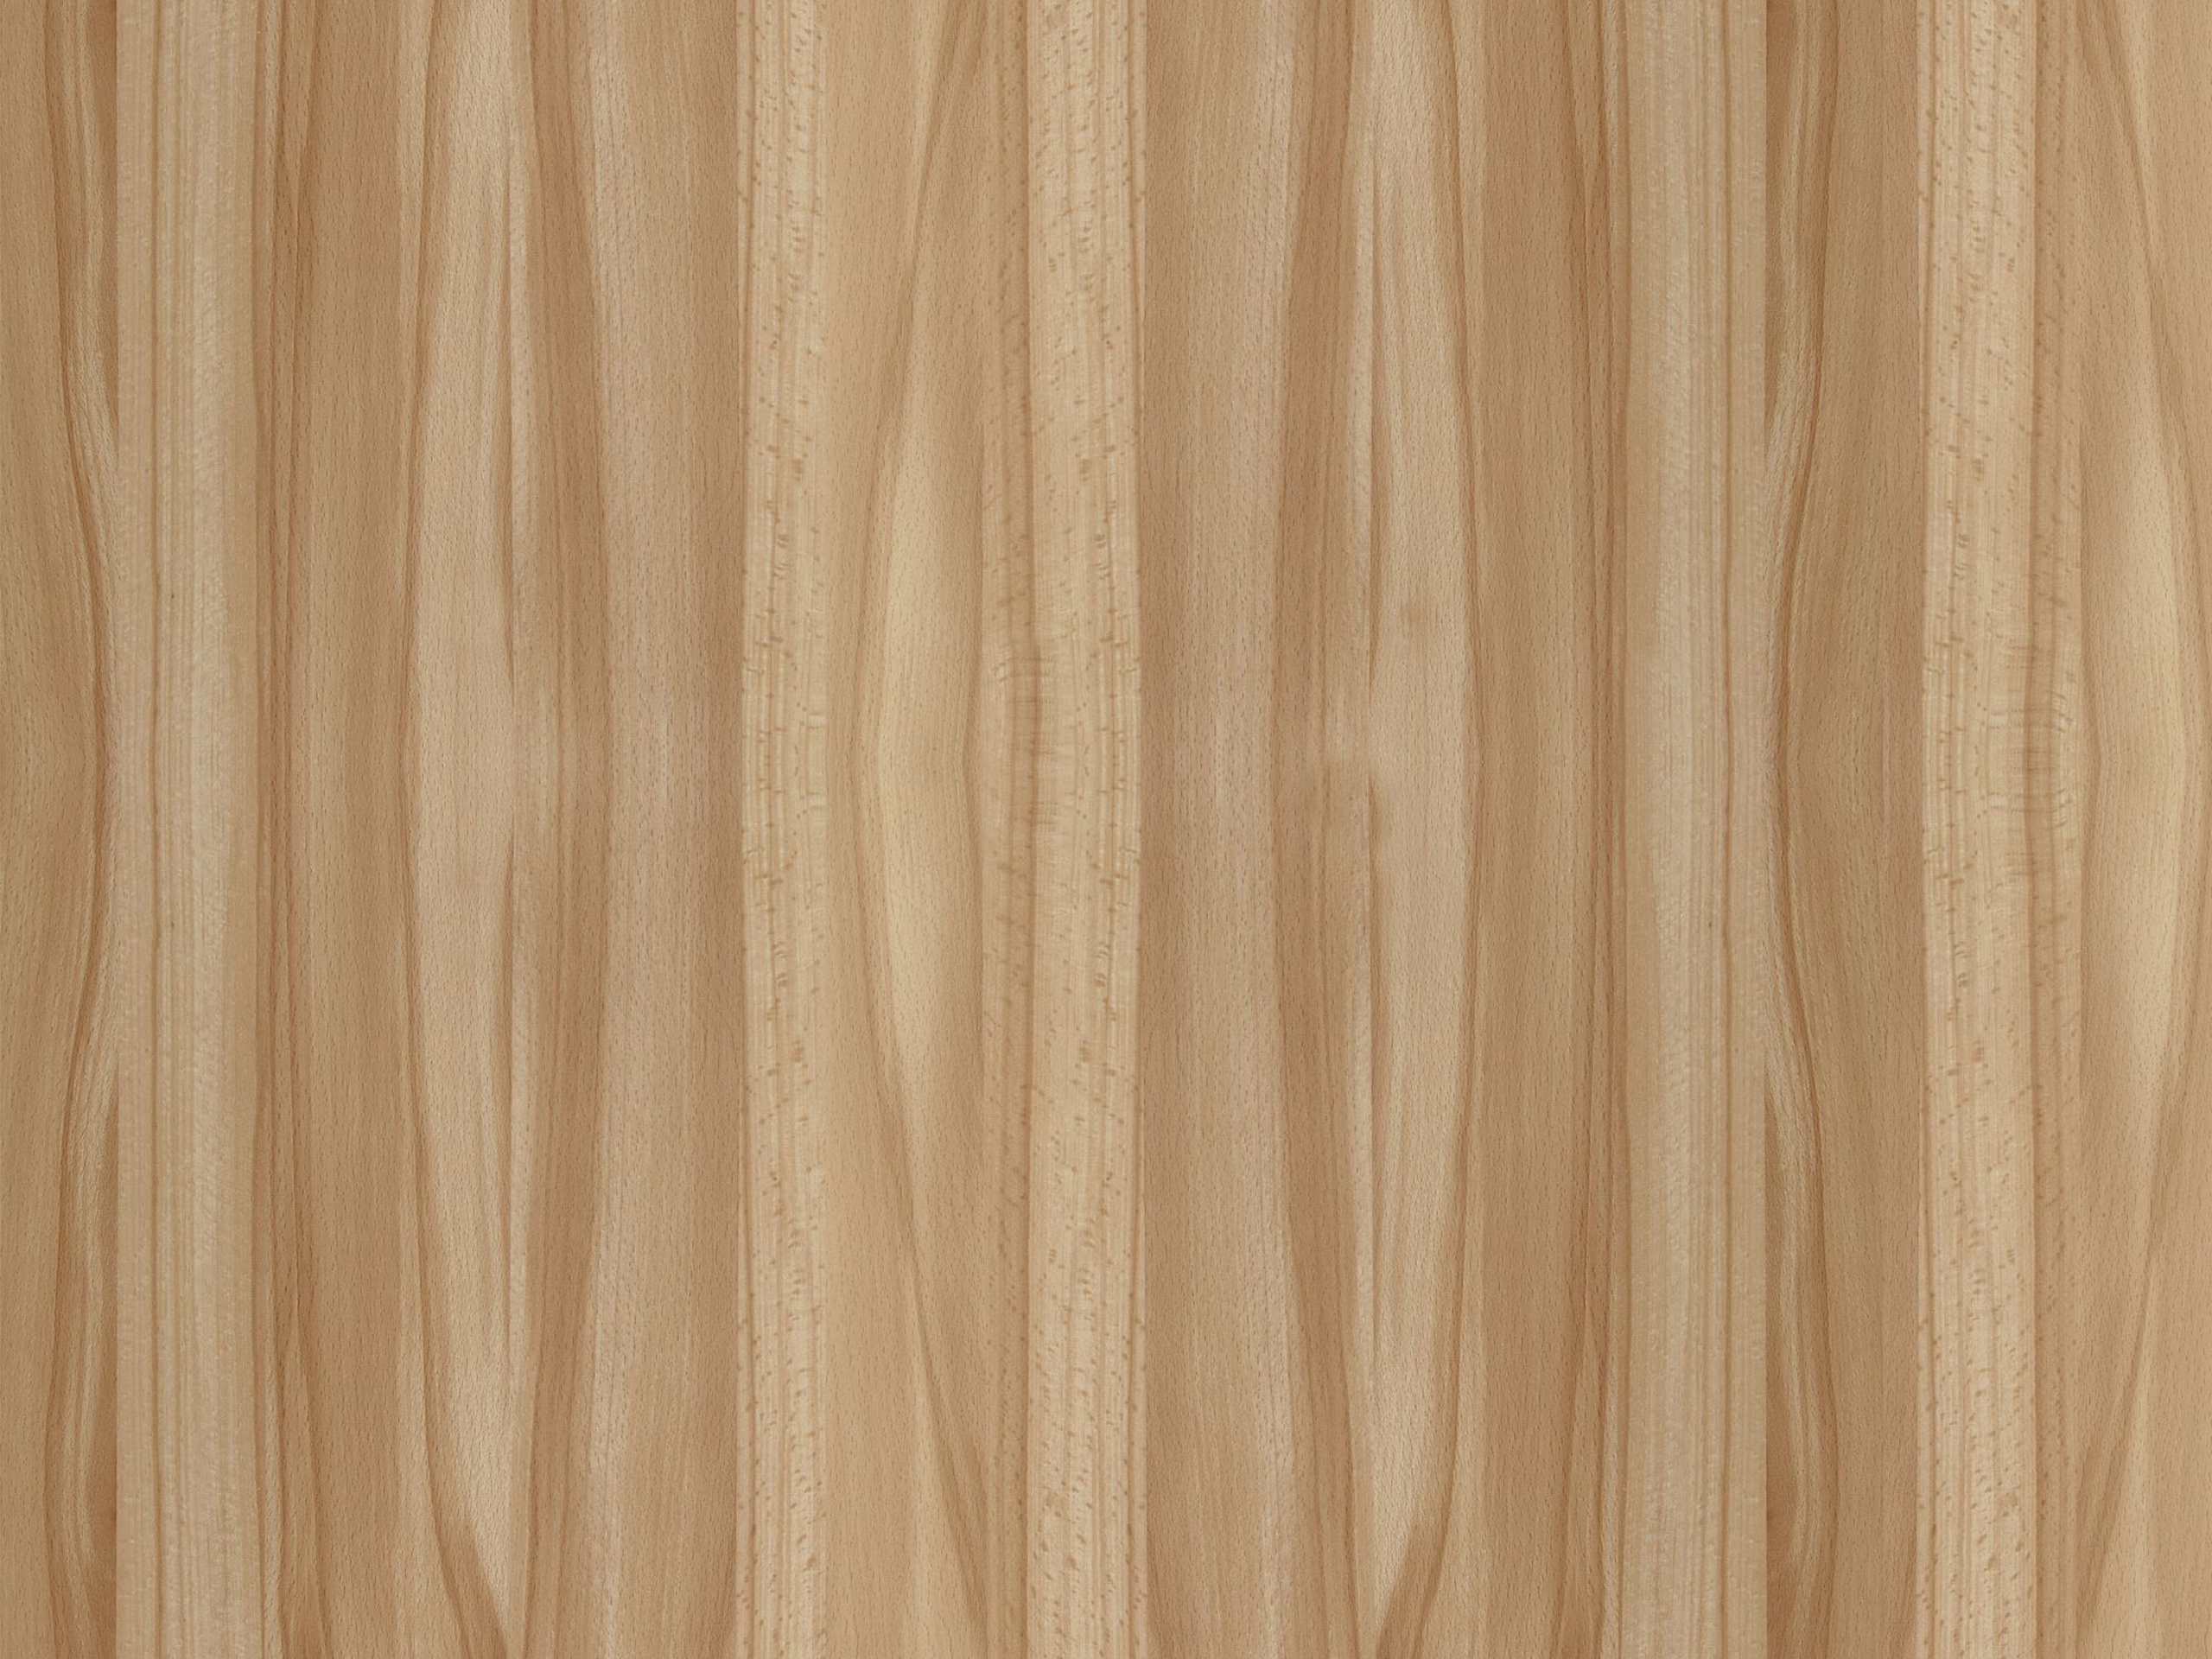 Wood Desktop Wallpaper For Widescreen HD And Mobile